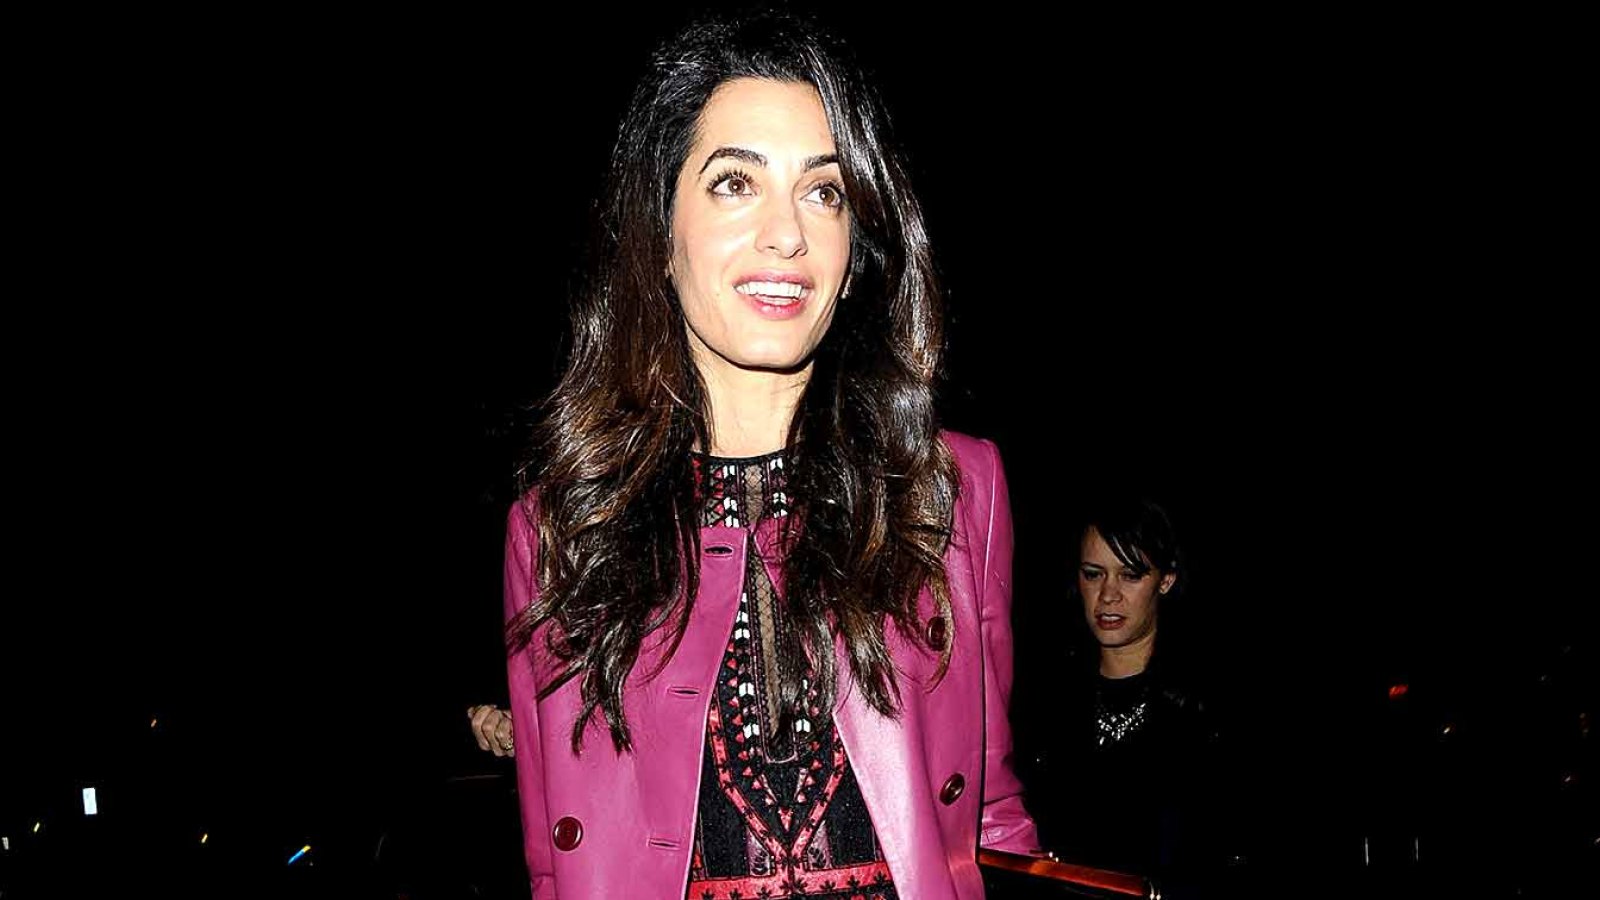 Amal Clooney leaves celebrity hotspot Sexy Fish Restaurant with friends at 2AM in Mayfair.